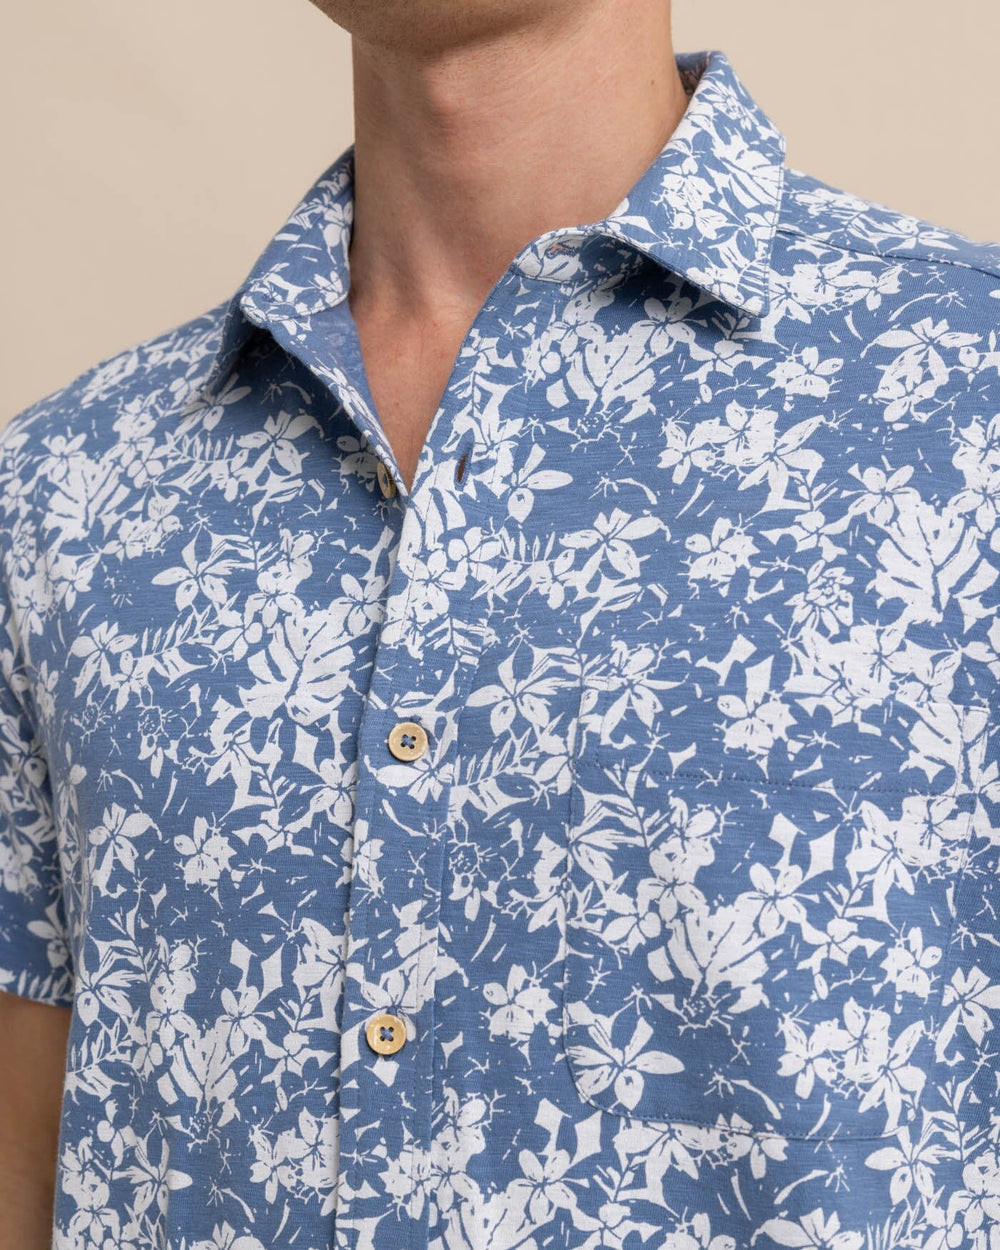 The detail view of the Southern Tide Beachcast Island Blooms Knit Short Sleeve Sport Shirt by Southern Tide - Coronet Blue